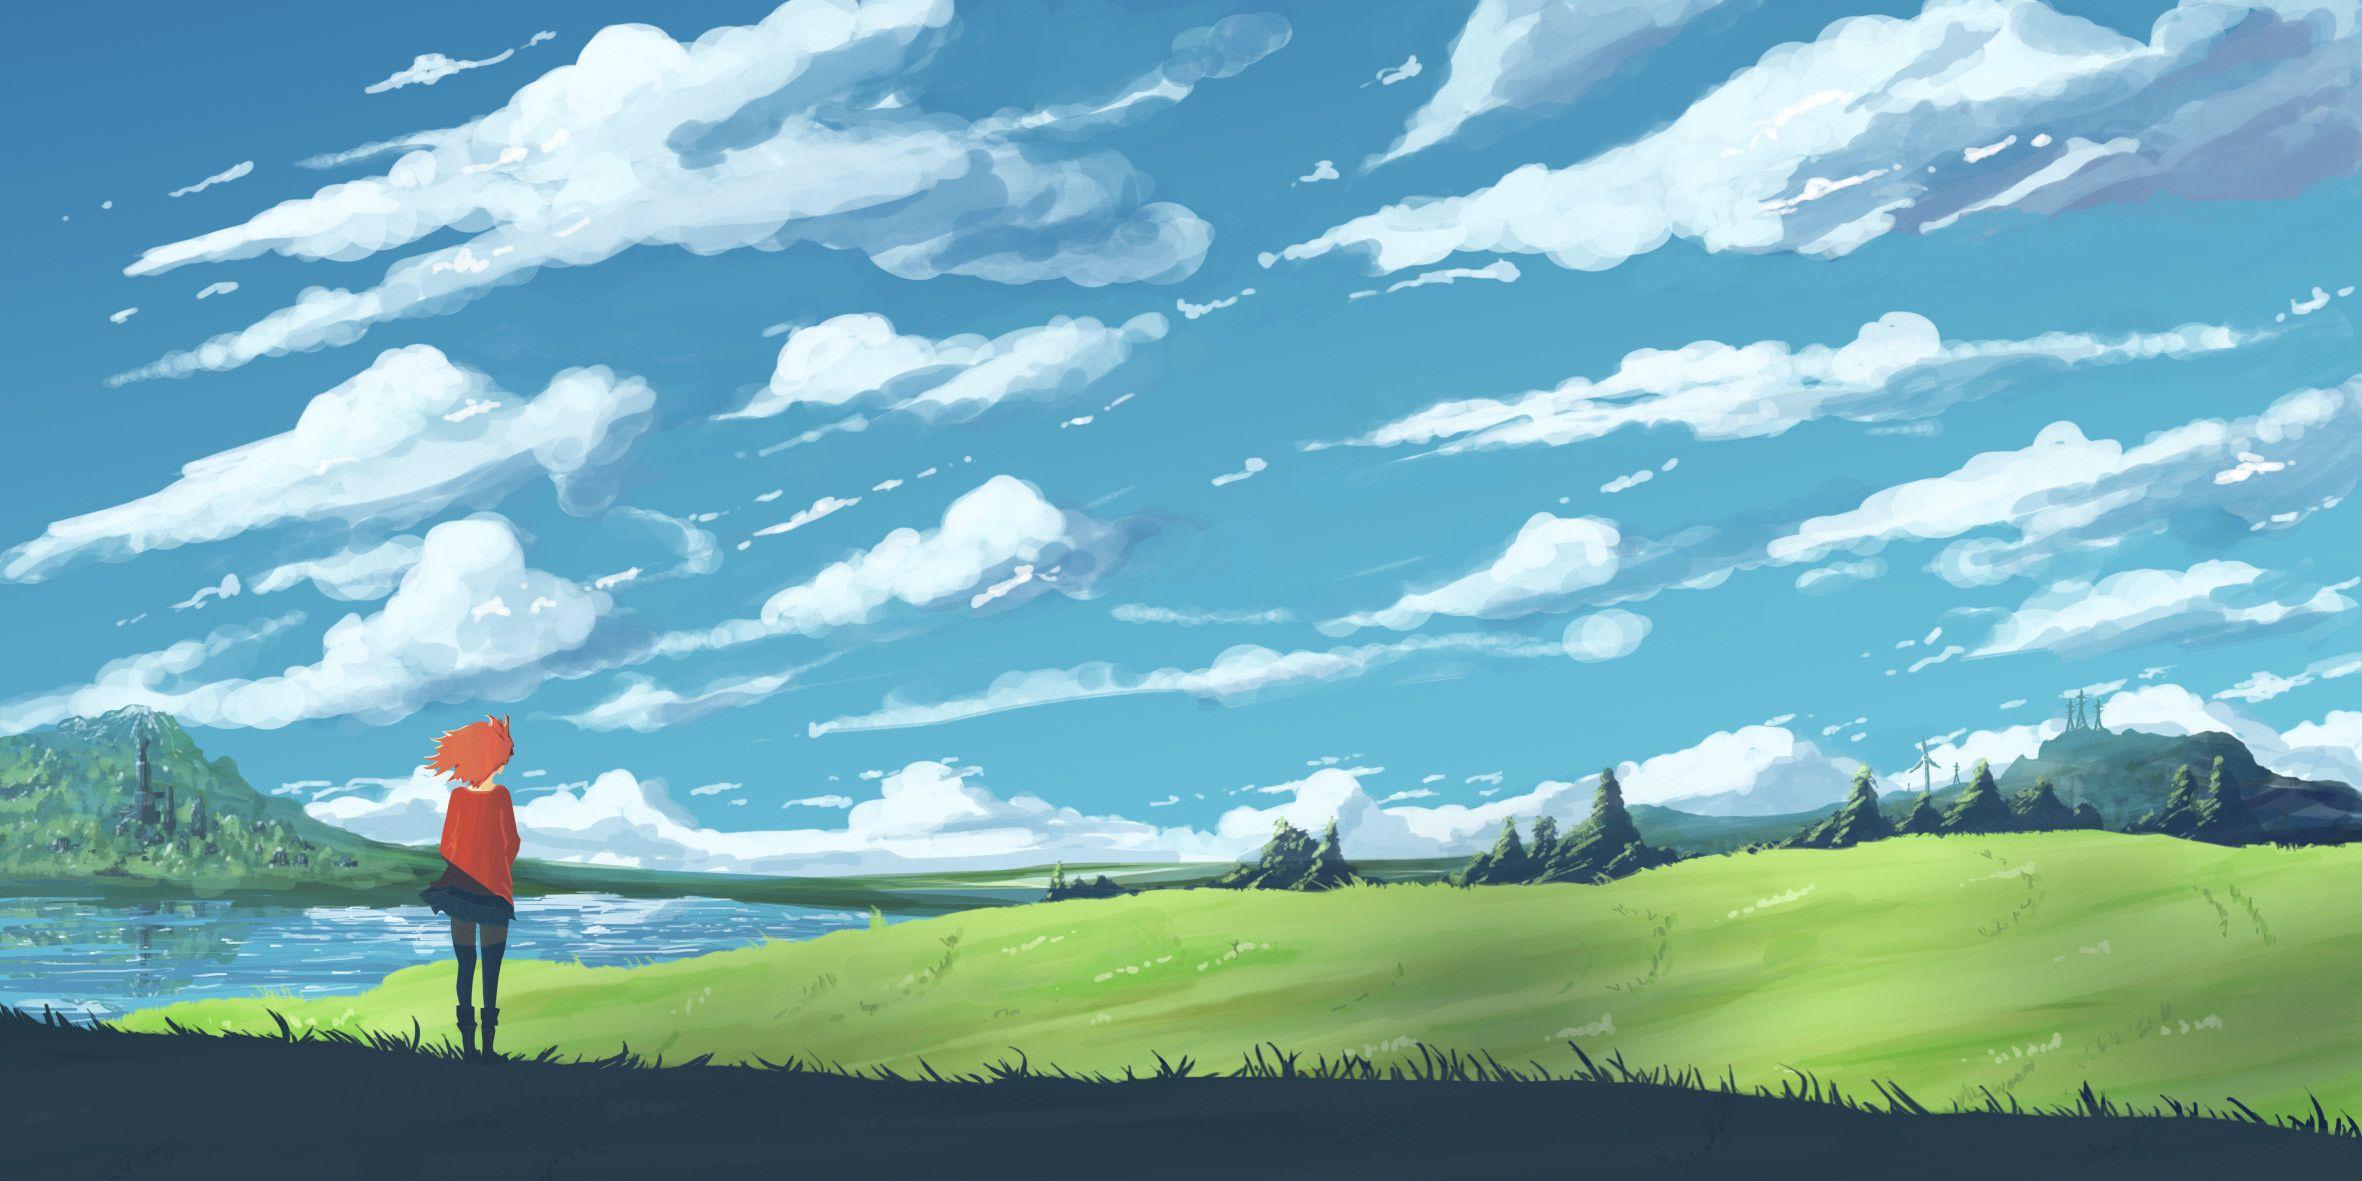 Is there any nice anime about countryside? I'm seeking for some series  about whether living, working or anything with main theme of real  countryside. Of course it doesn't necessarily have to take